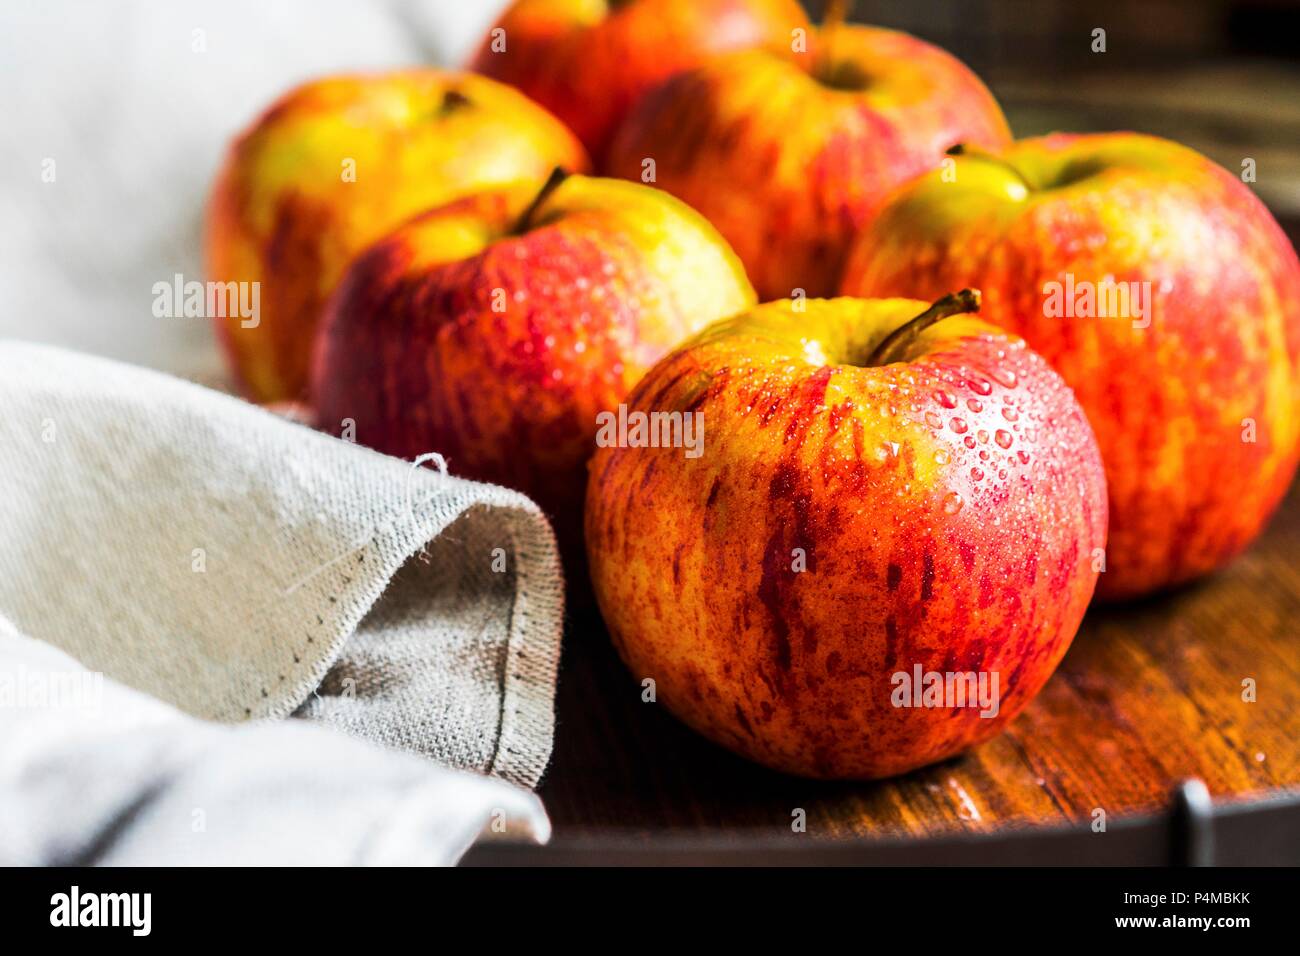 Fresh apples on a wooden surface Stock Photo